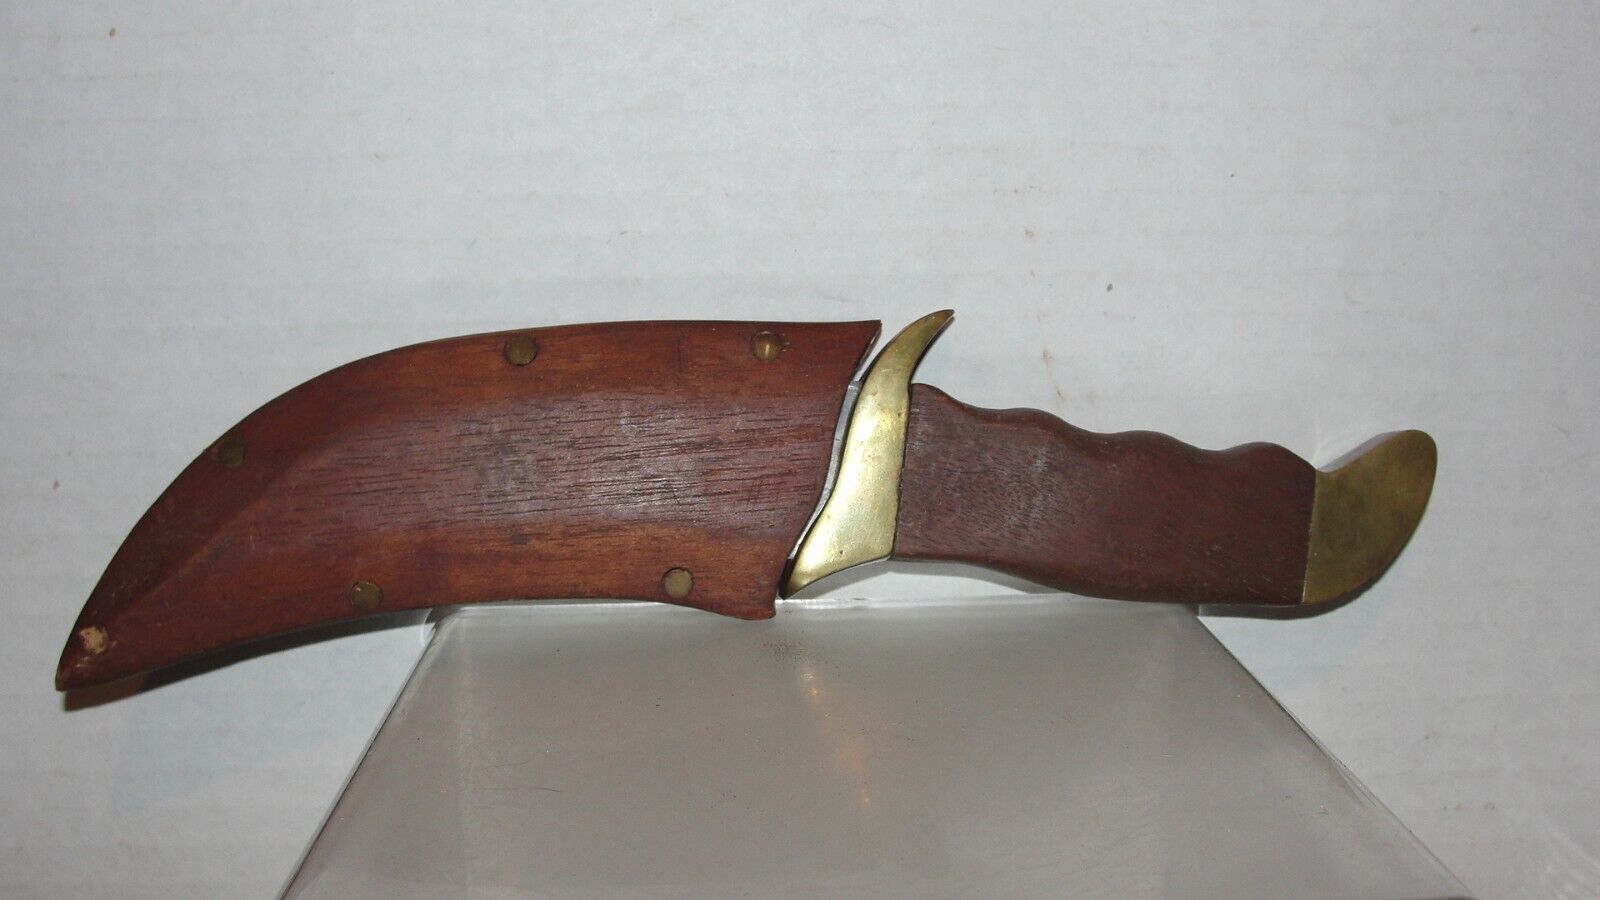 VINTAGE CVA SPAIN FIXED BLADE HUNTING  BOWIE KNIFE WITH WOODEN SHEATH